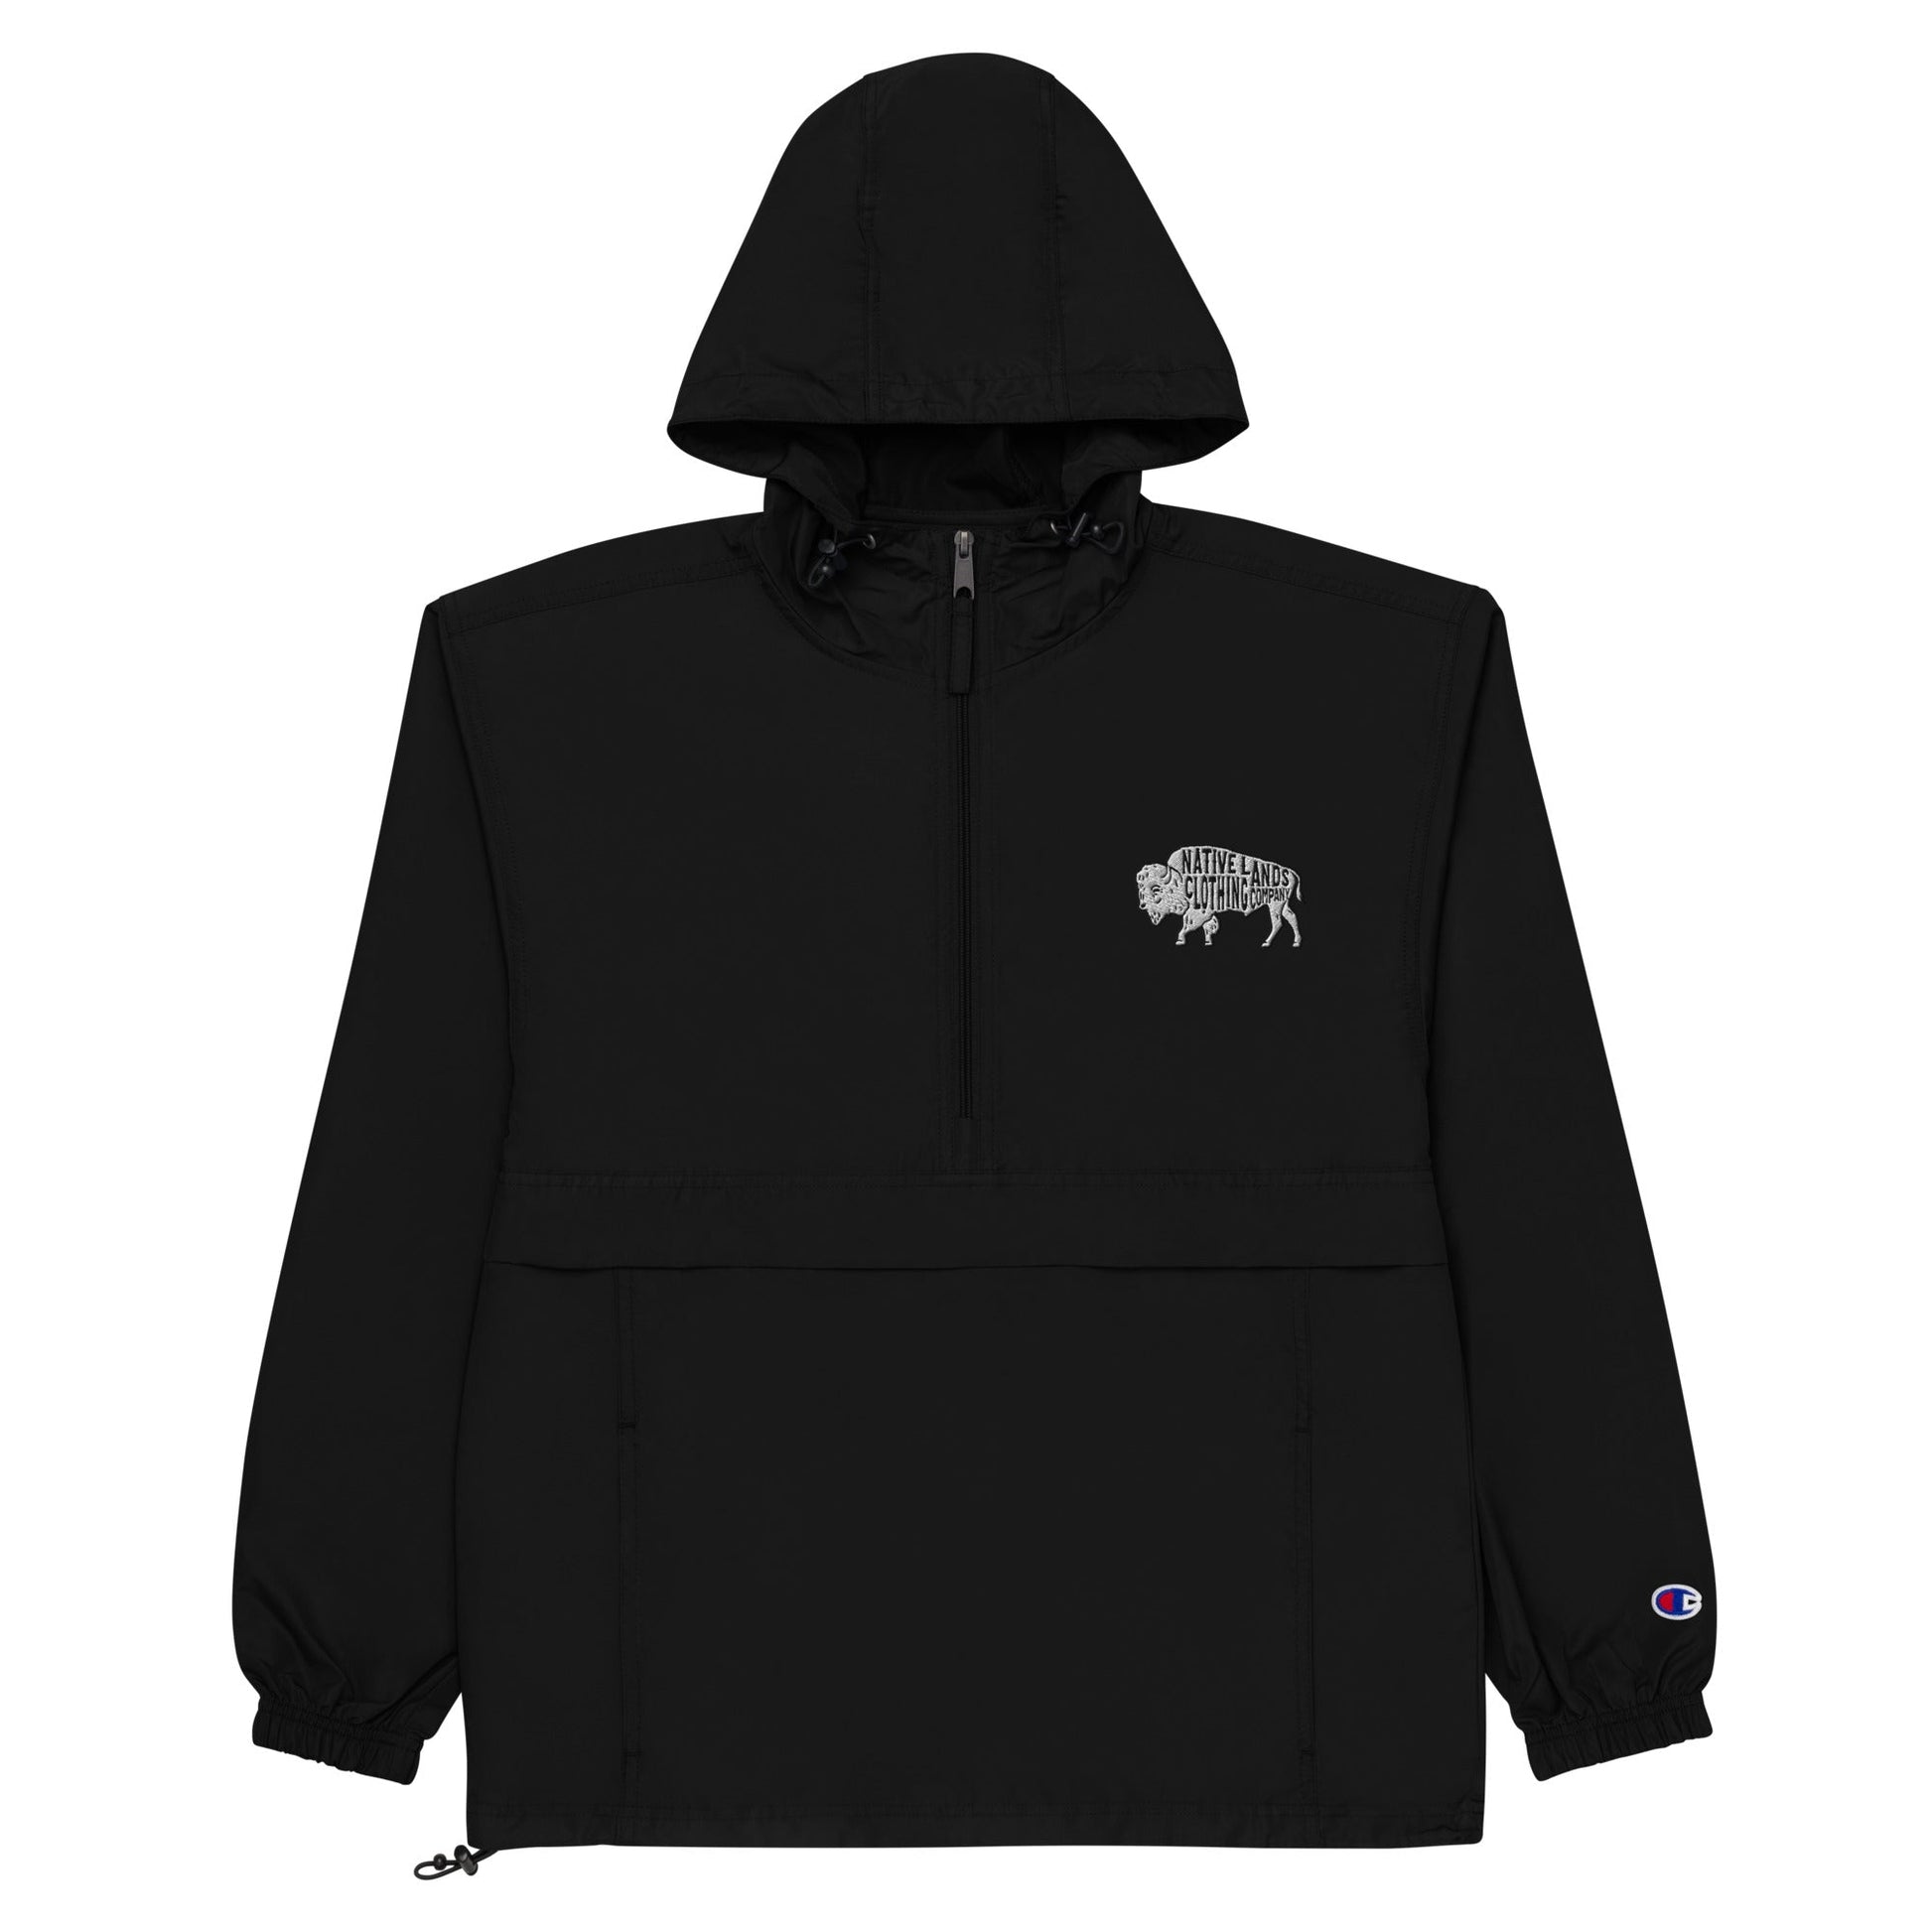 Bison Rain Jacket Embroidered Native American Native Lands Clothing Company LLC